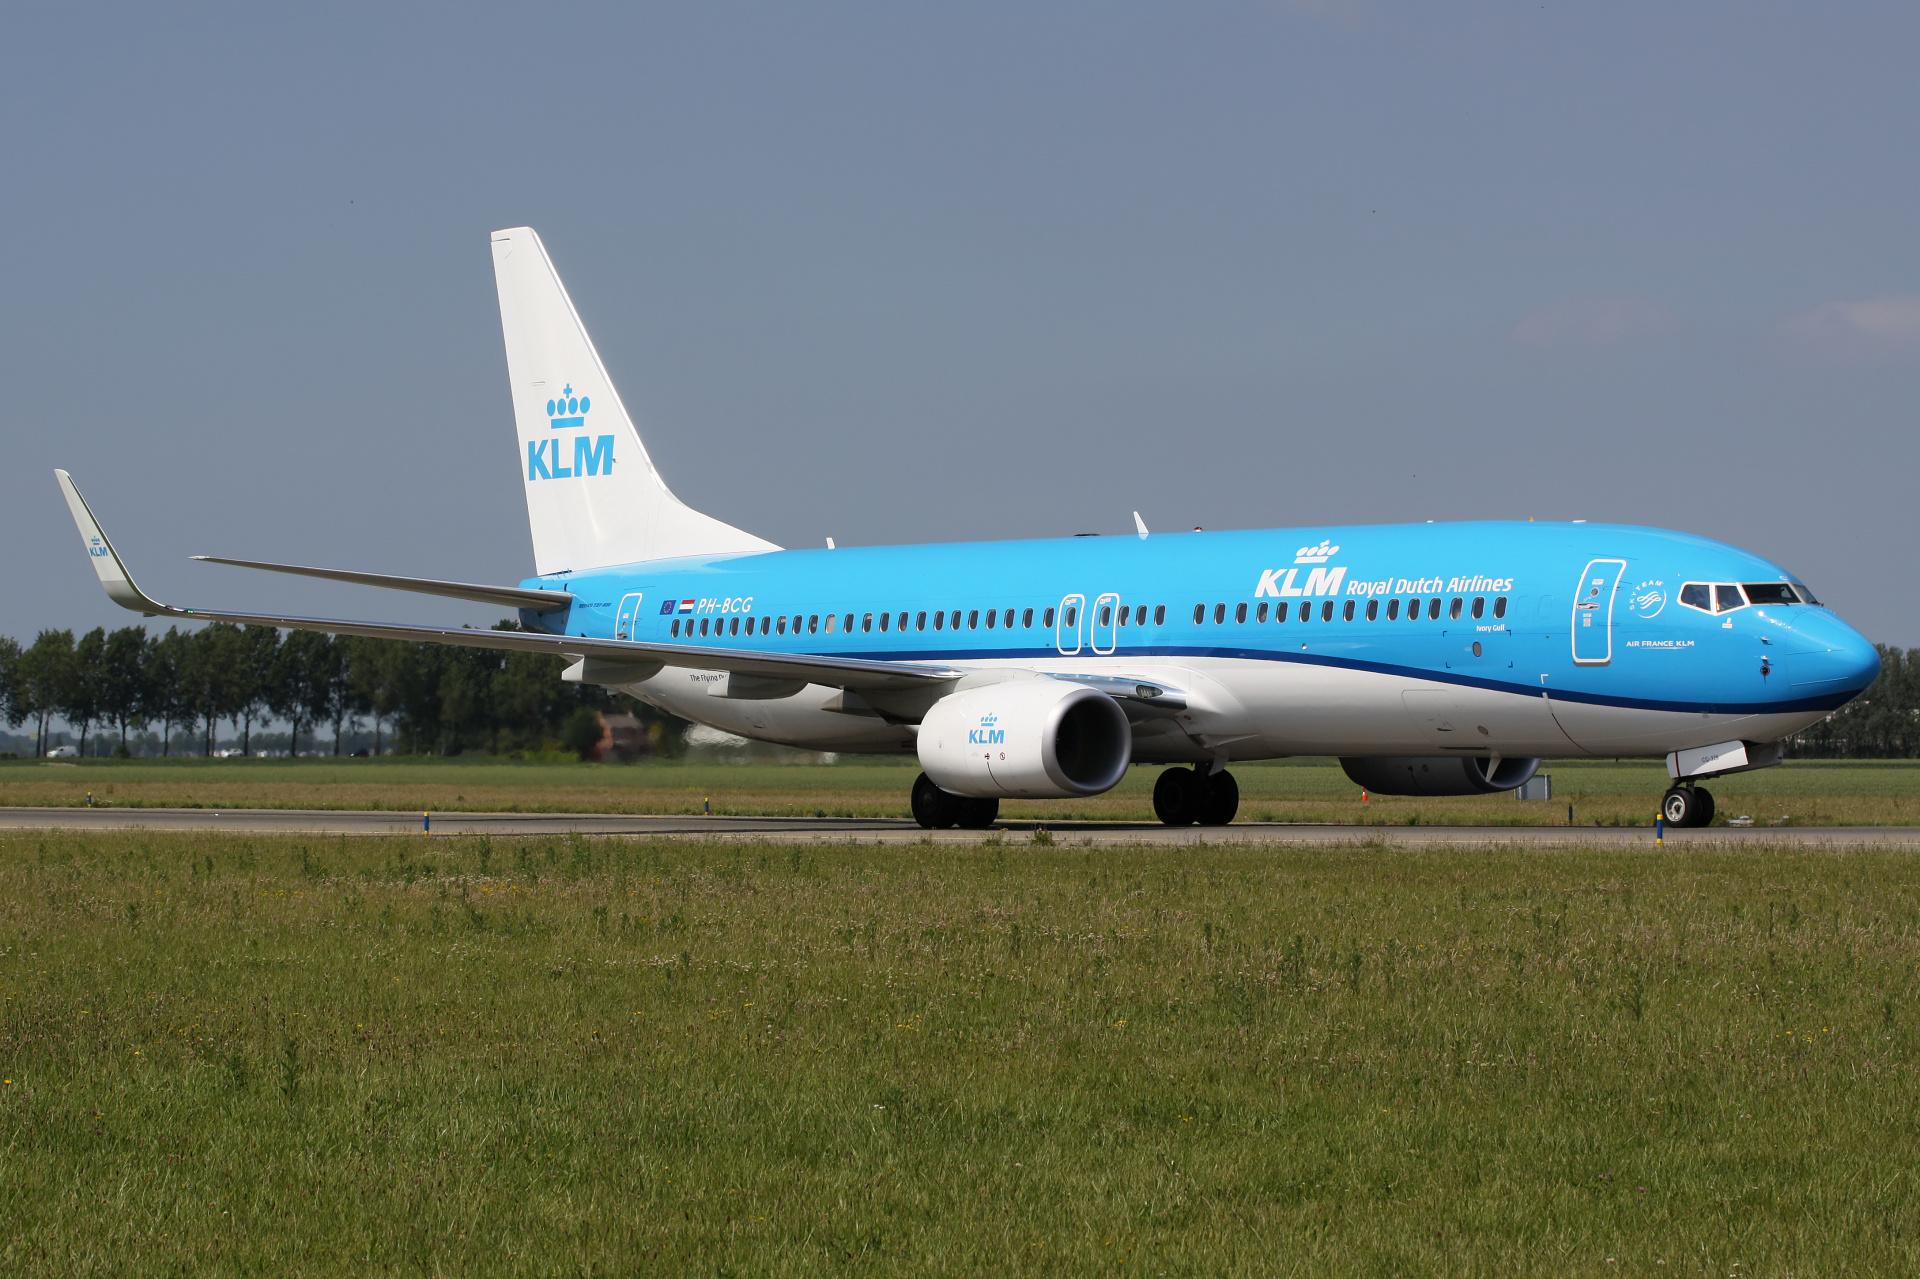 PH-BCG (Aircraft » Schiphol Spotting » Boeing 737-800 » KLM Royal Dutch Airlines)